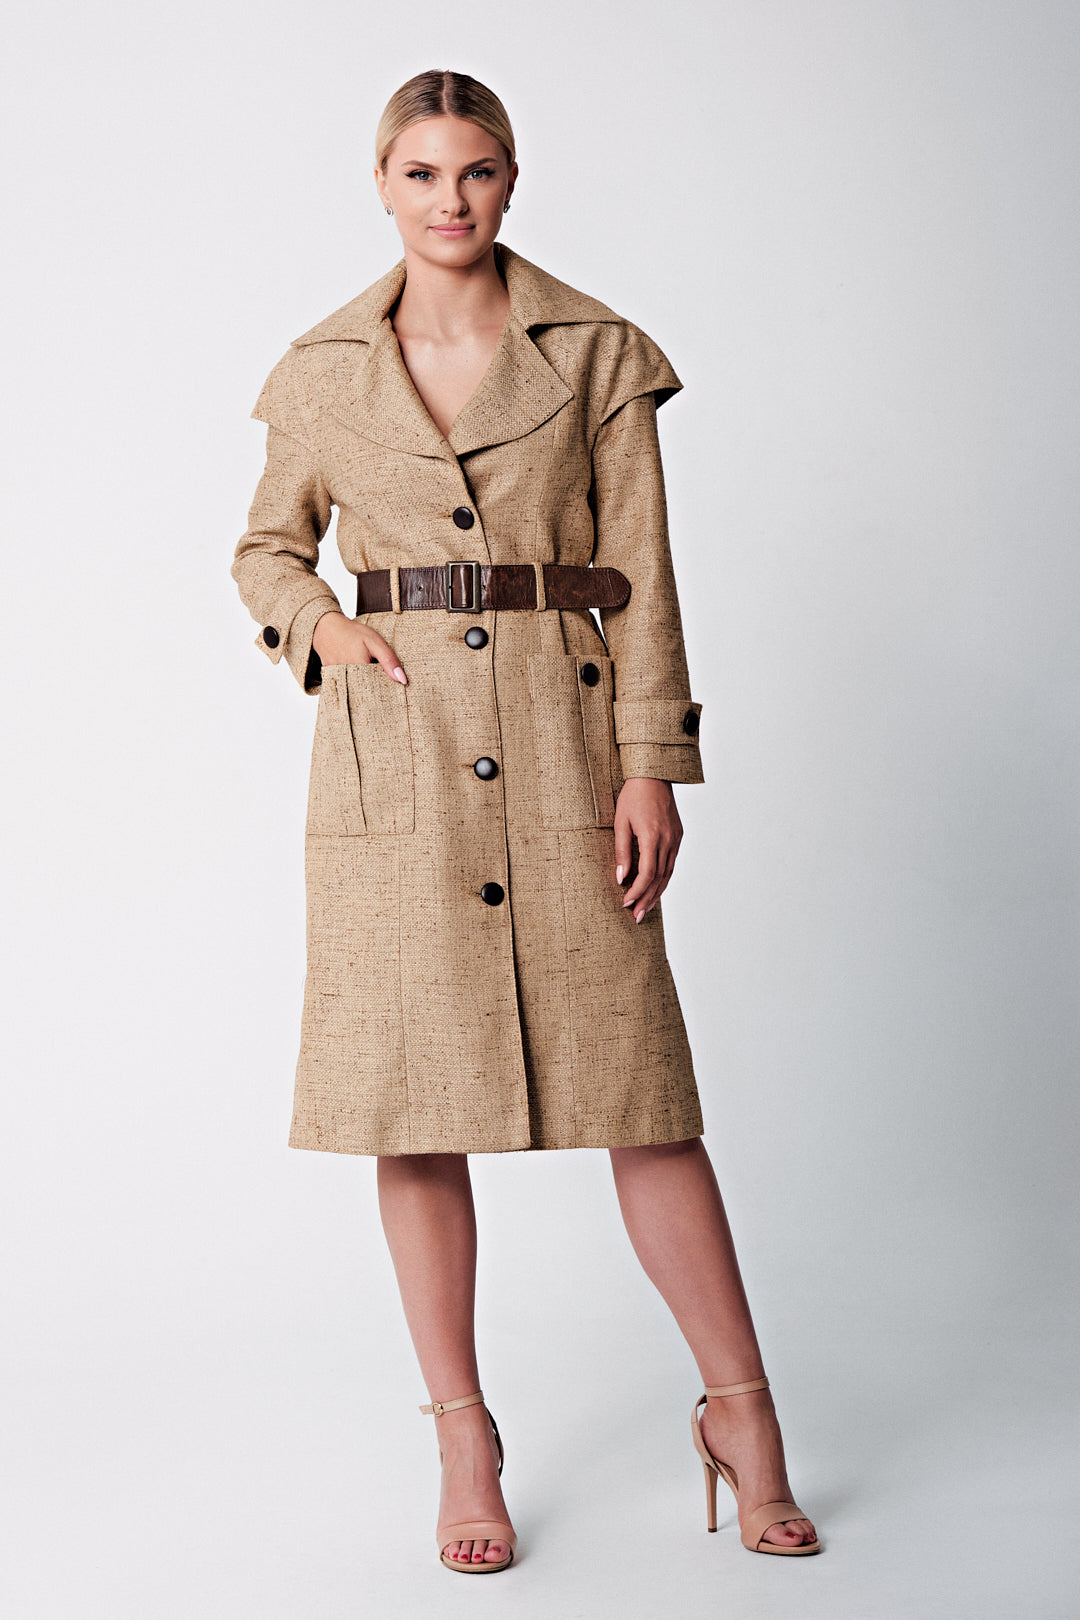 The camel coat | wild silk with leather details